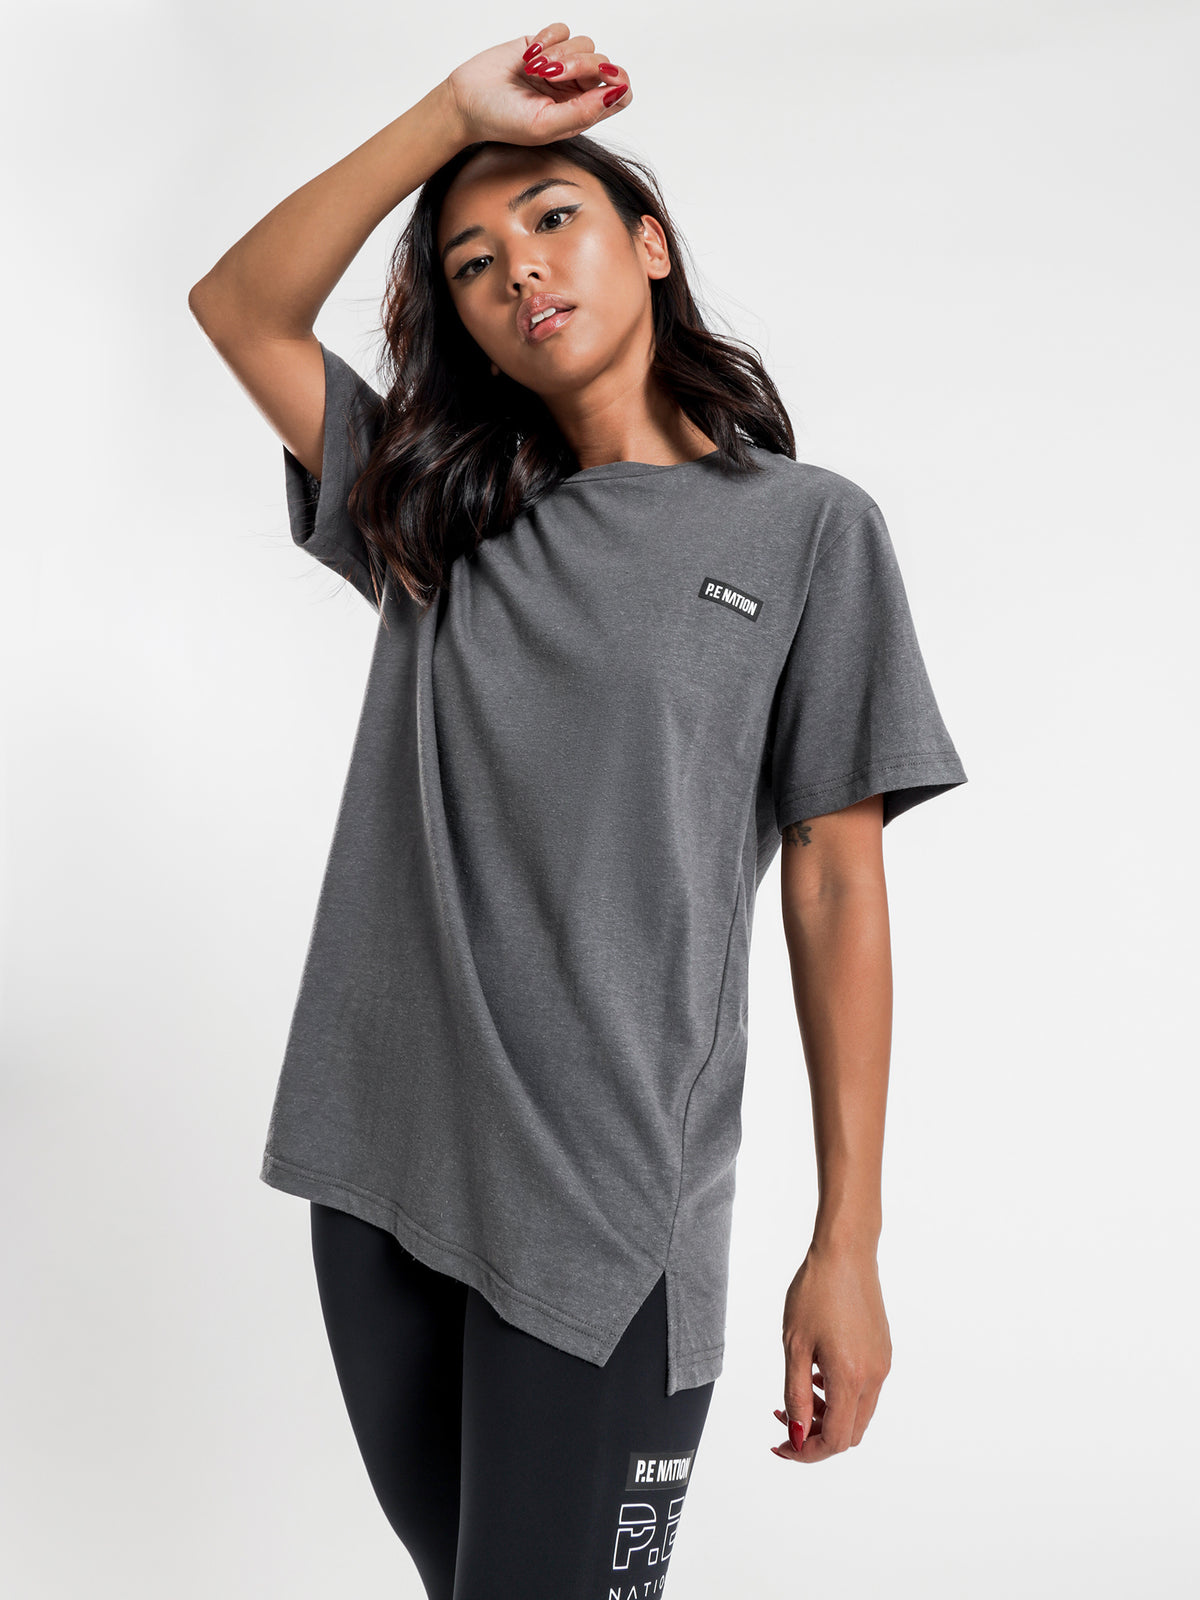 Forward Pass T-Shirt in Charcoal